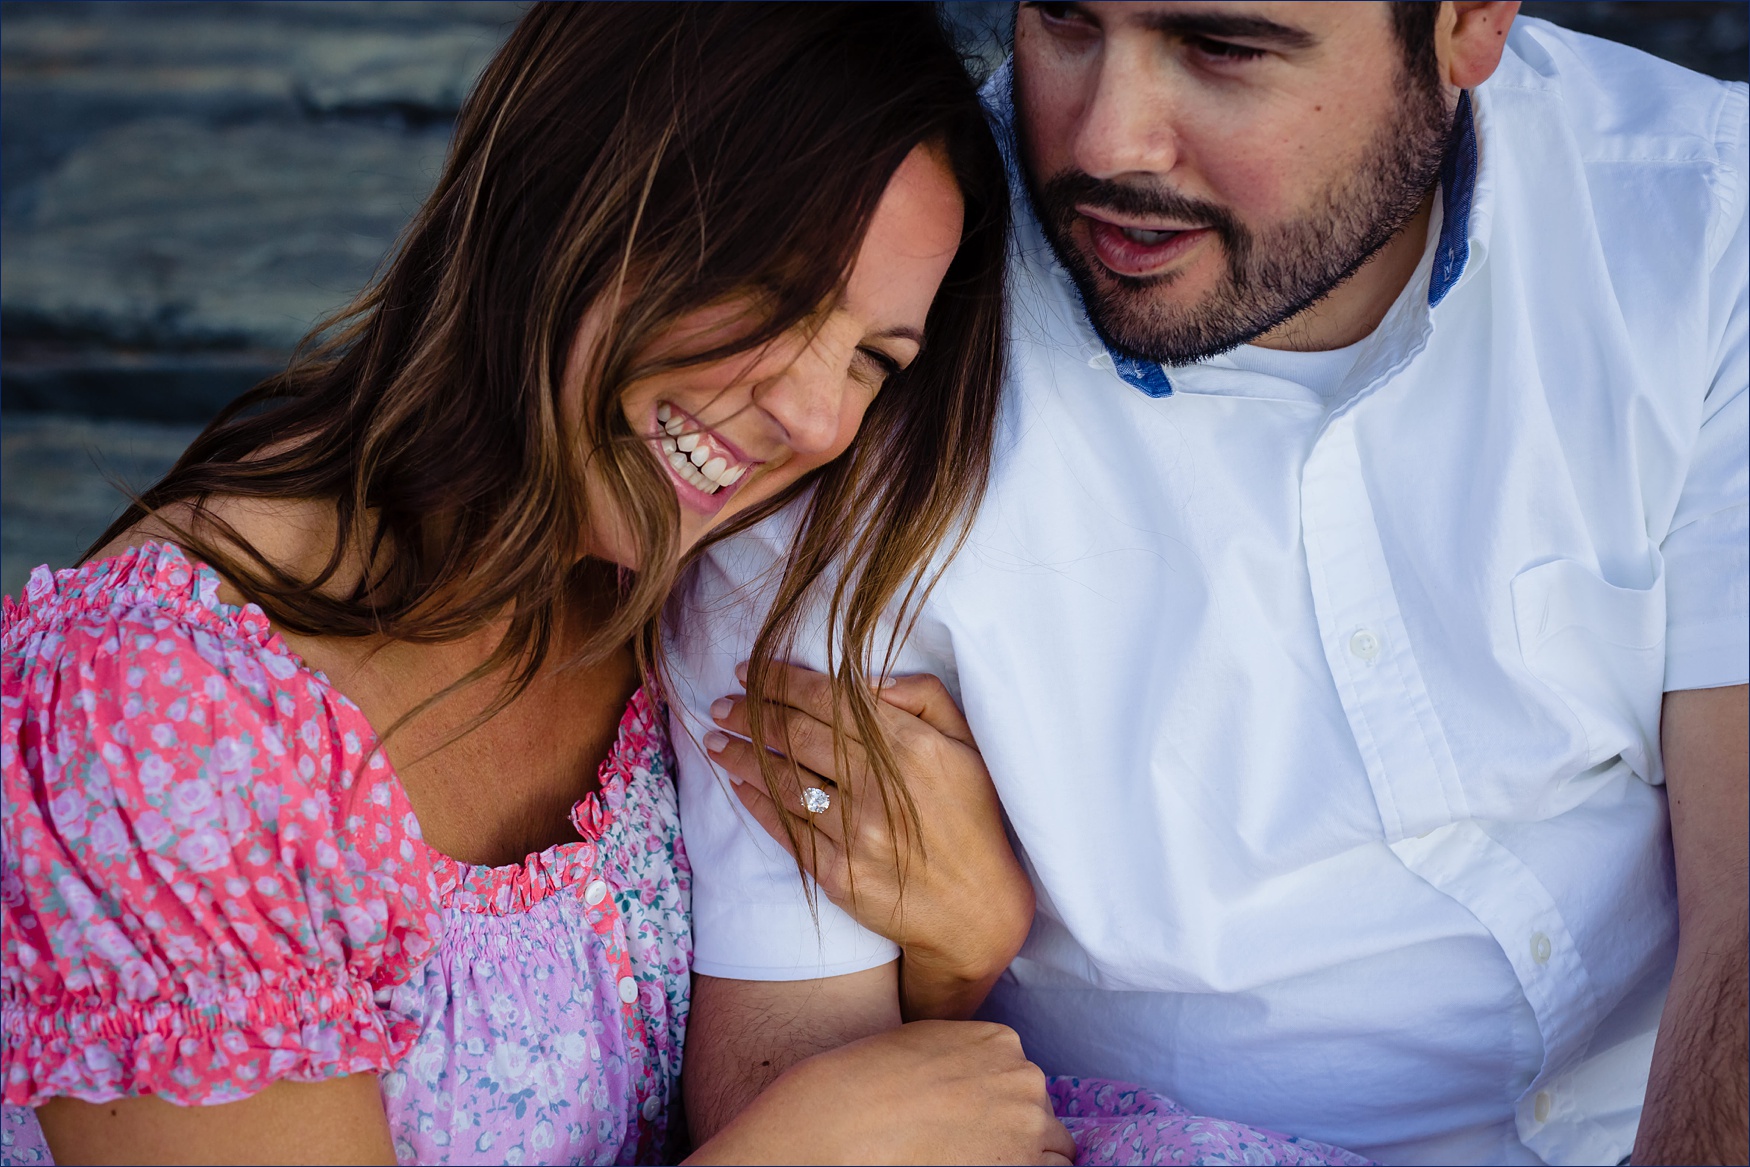 Cuddling close on the rocks of Bald Head Cliff for their engagement session